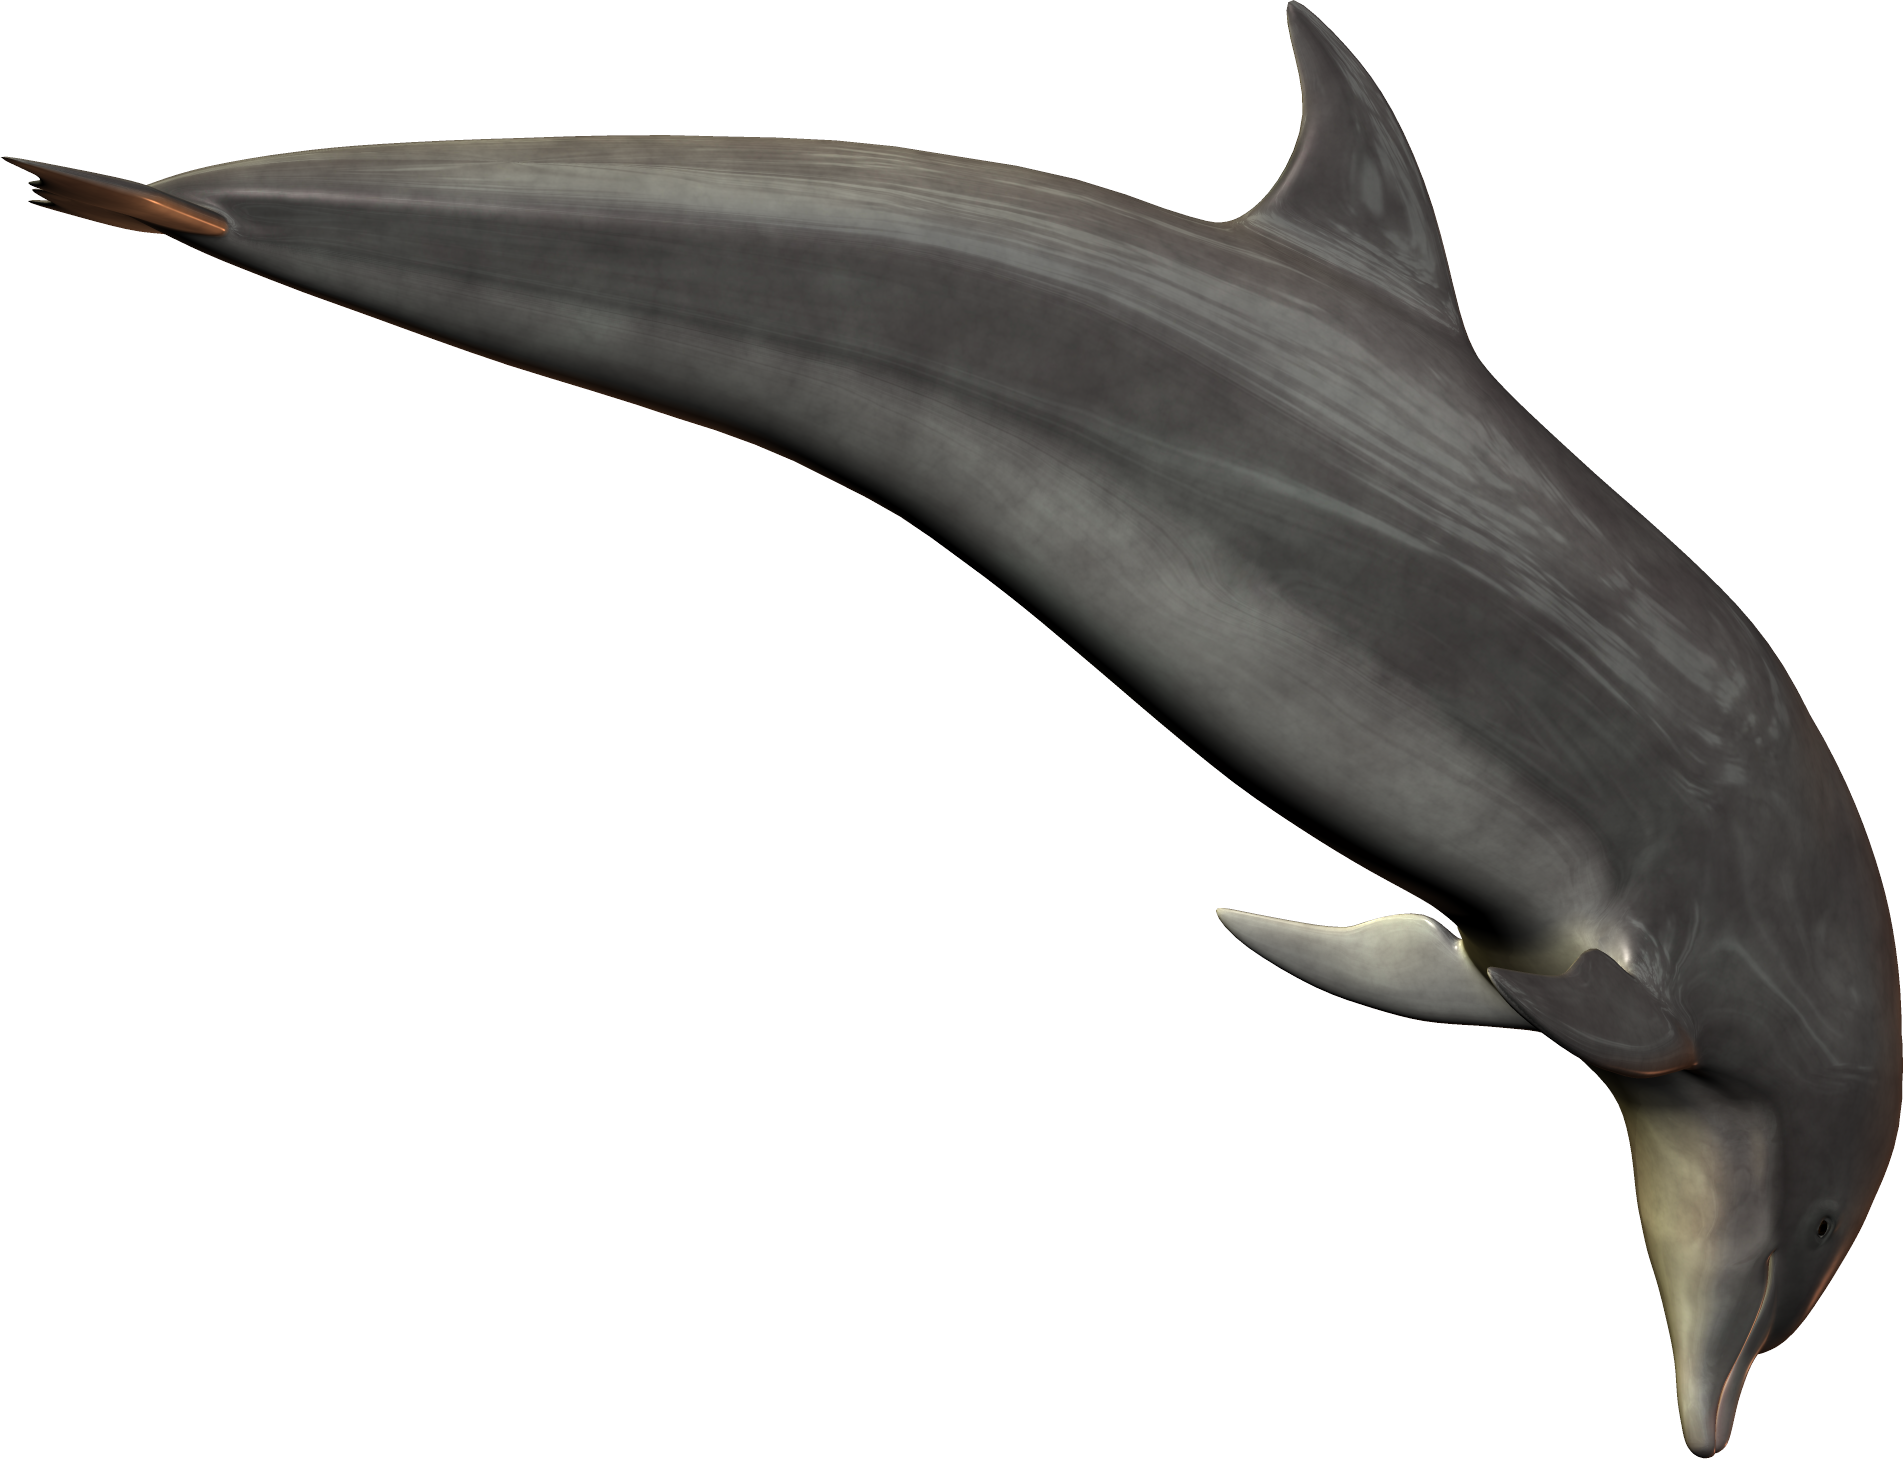 Dolphin PNG image free Download